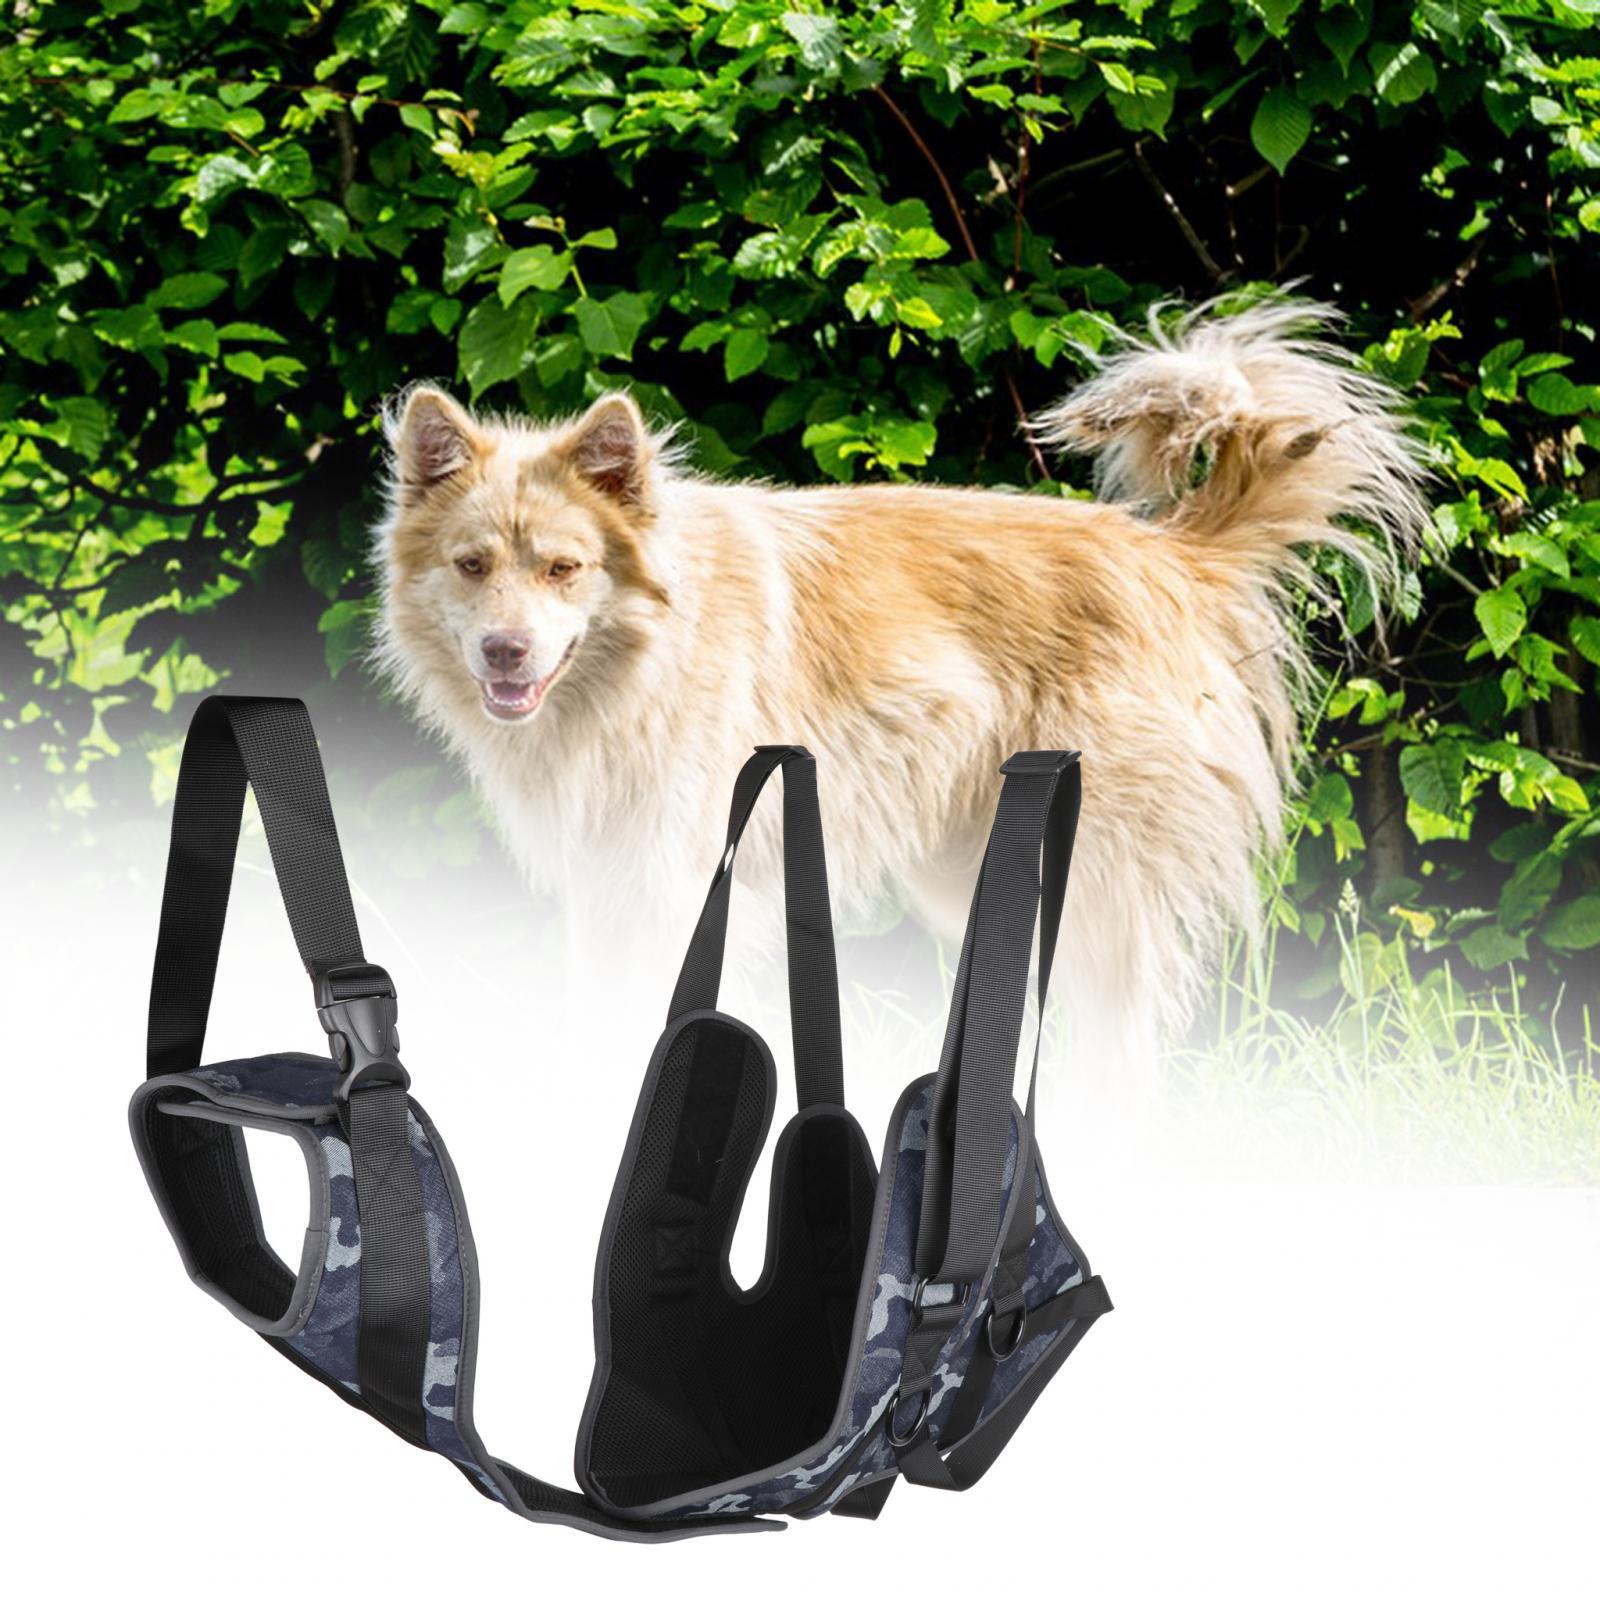 Aimishion Dog Support Harness Durable Pets Chest Vest for Small Medium